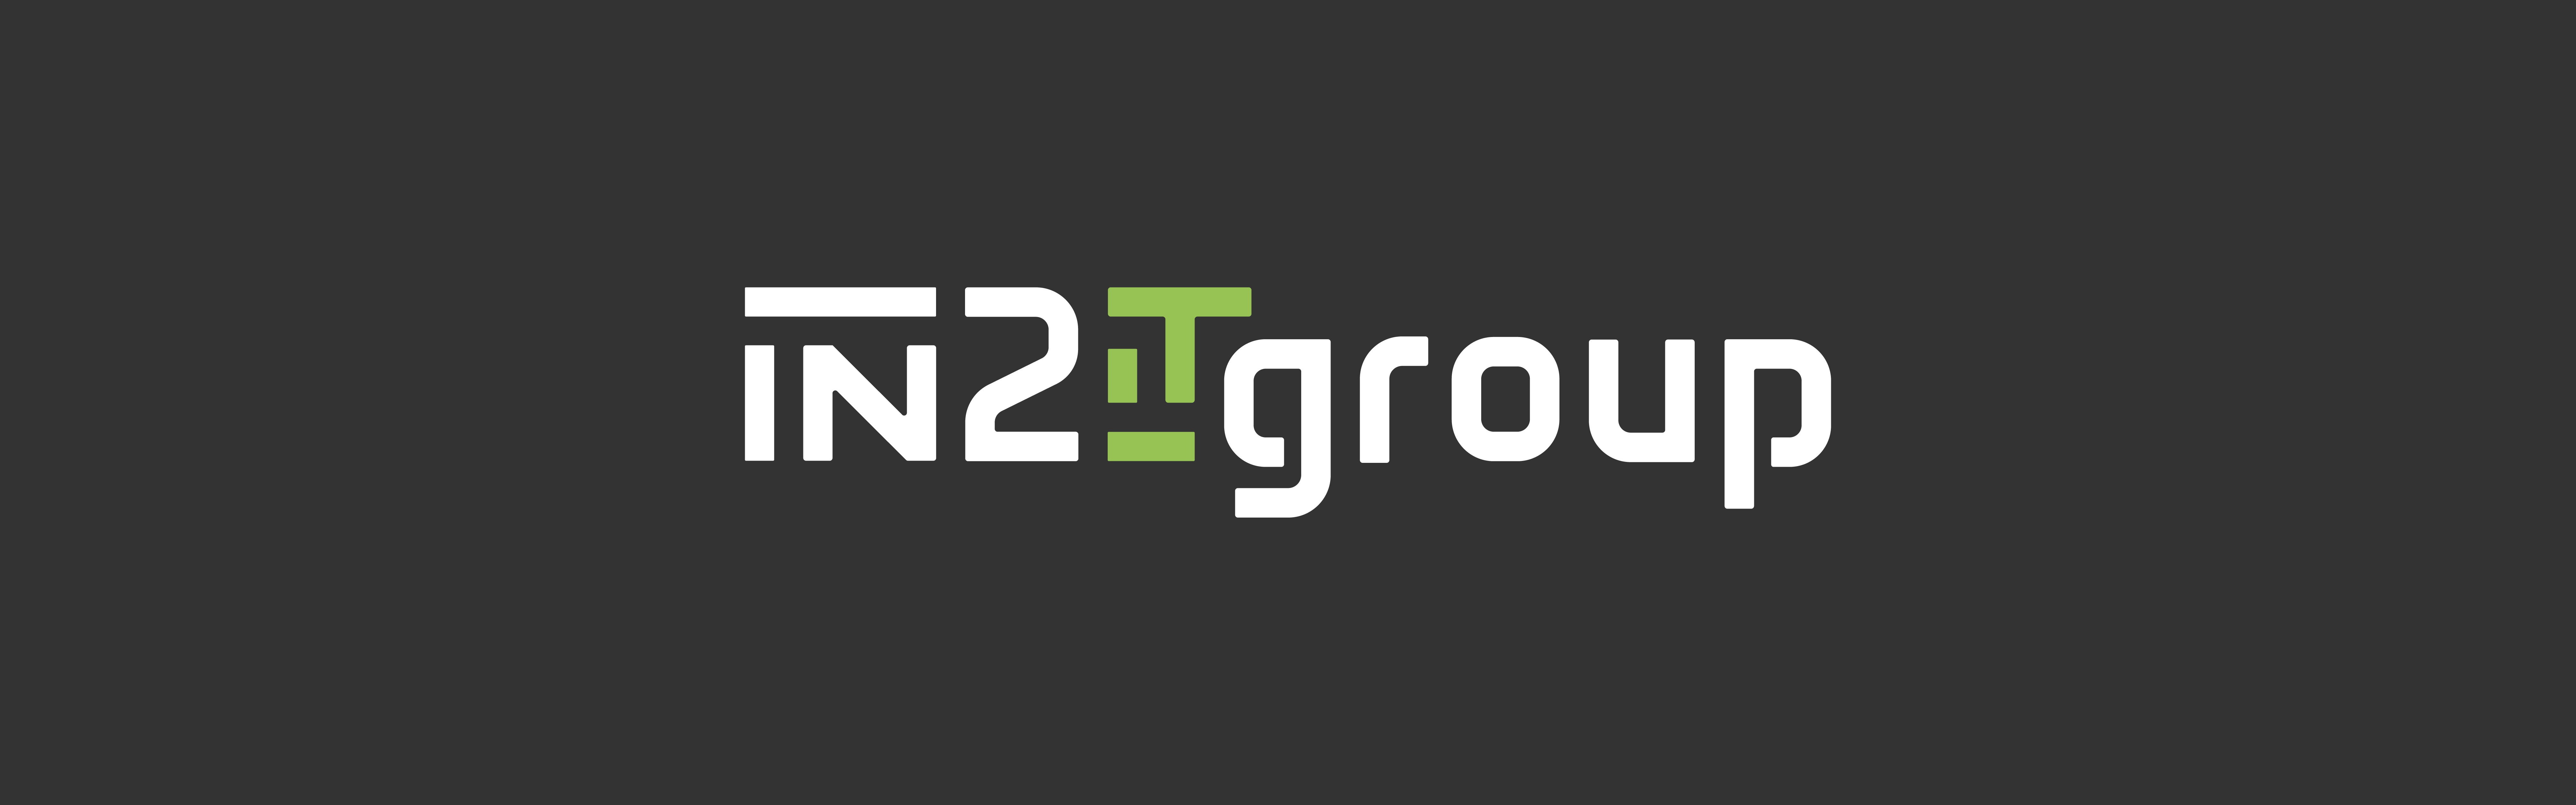 Logo of "IN2IT Group" featuring white text on a dark background, with the "2" in green and styled to resemble an arrow pointing upwards.